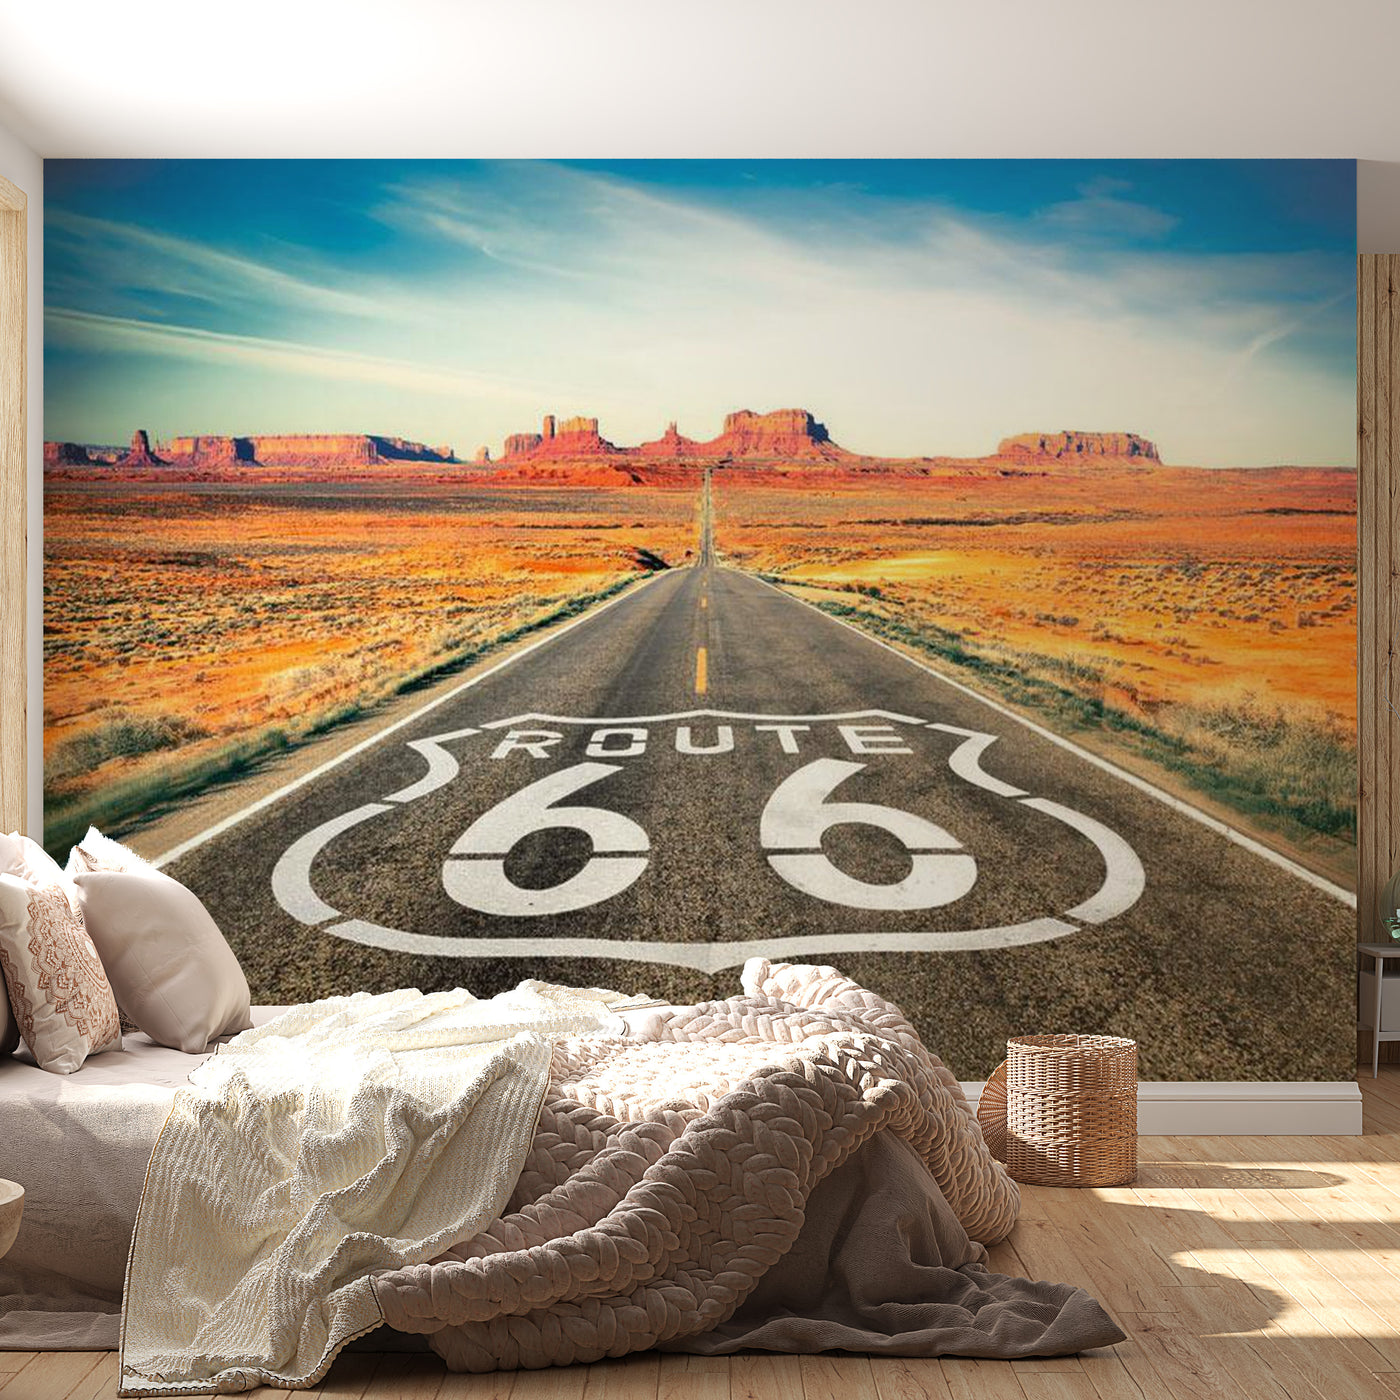 Peel & Stick Wall Mural - Route 66 - Removable Wall Decals